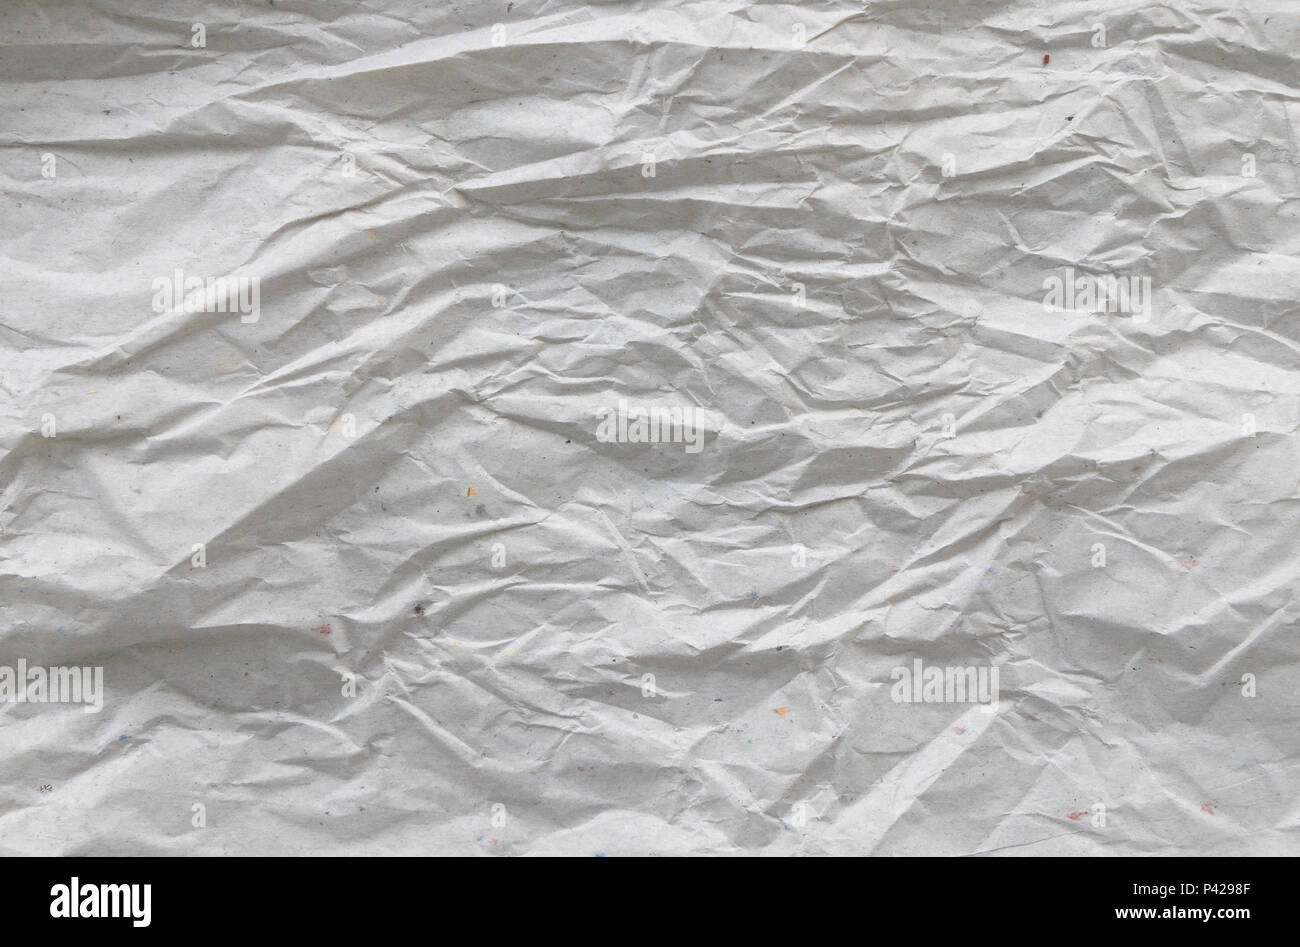 Crumpled paper texture and crushed grunge paper background Stock Photo -  Alamy